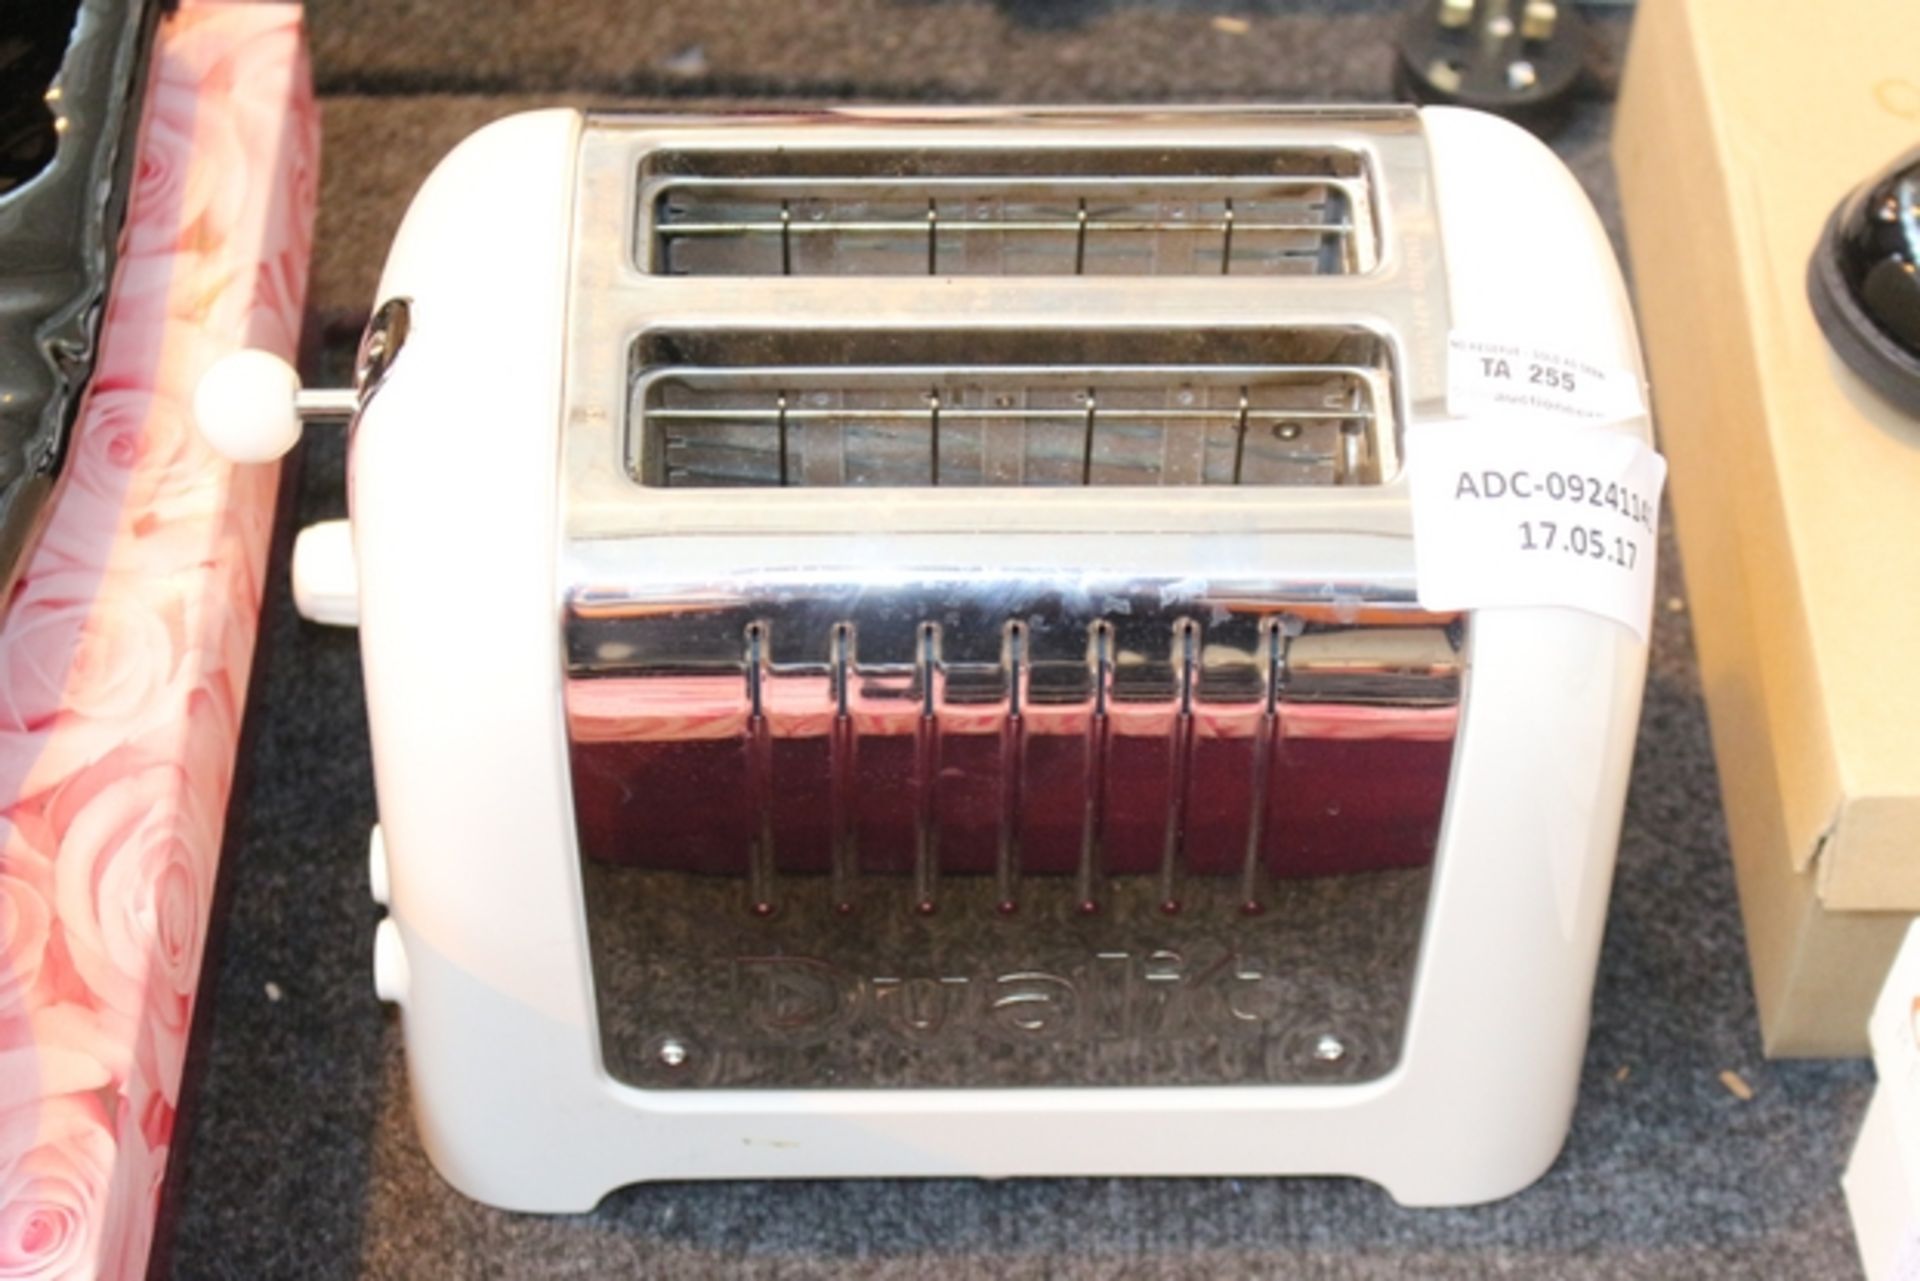 1X DUALIT 2 SLICE TOASTER RRP £60 (ADC-09241141) (17/05/17)